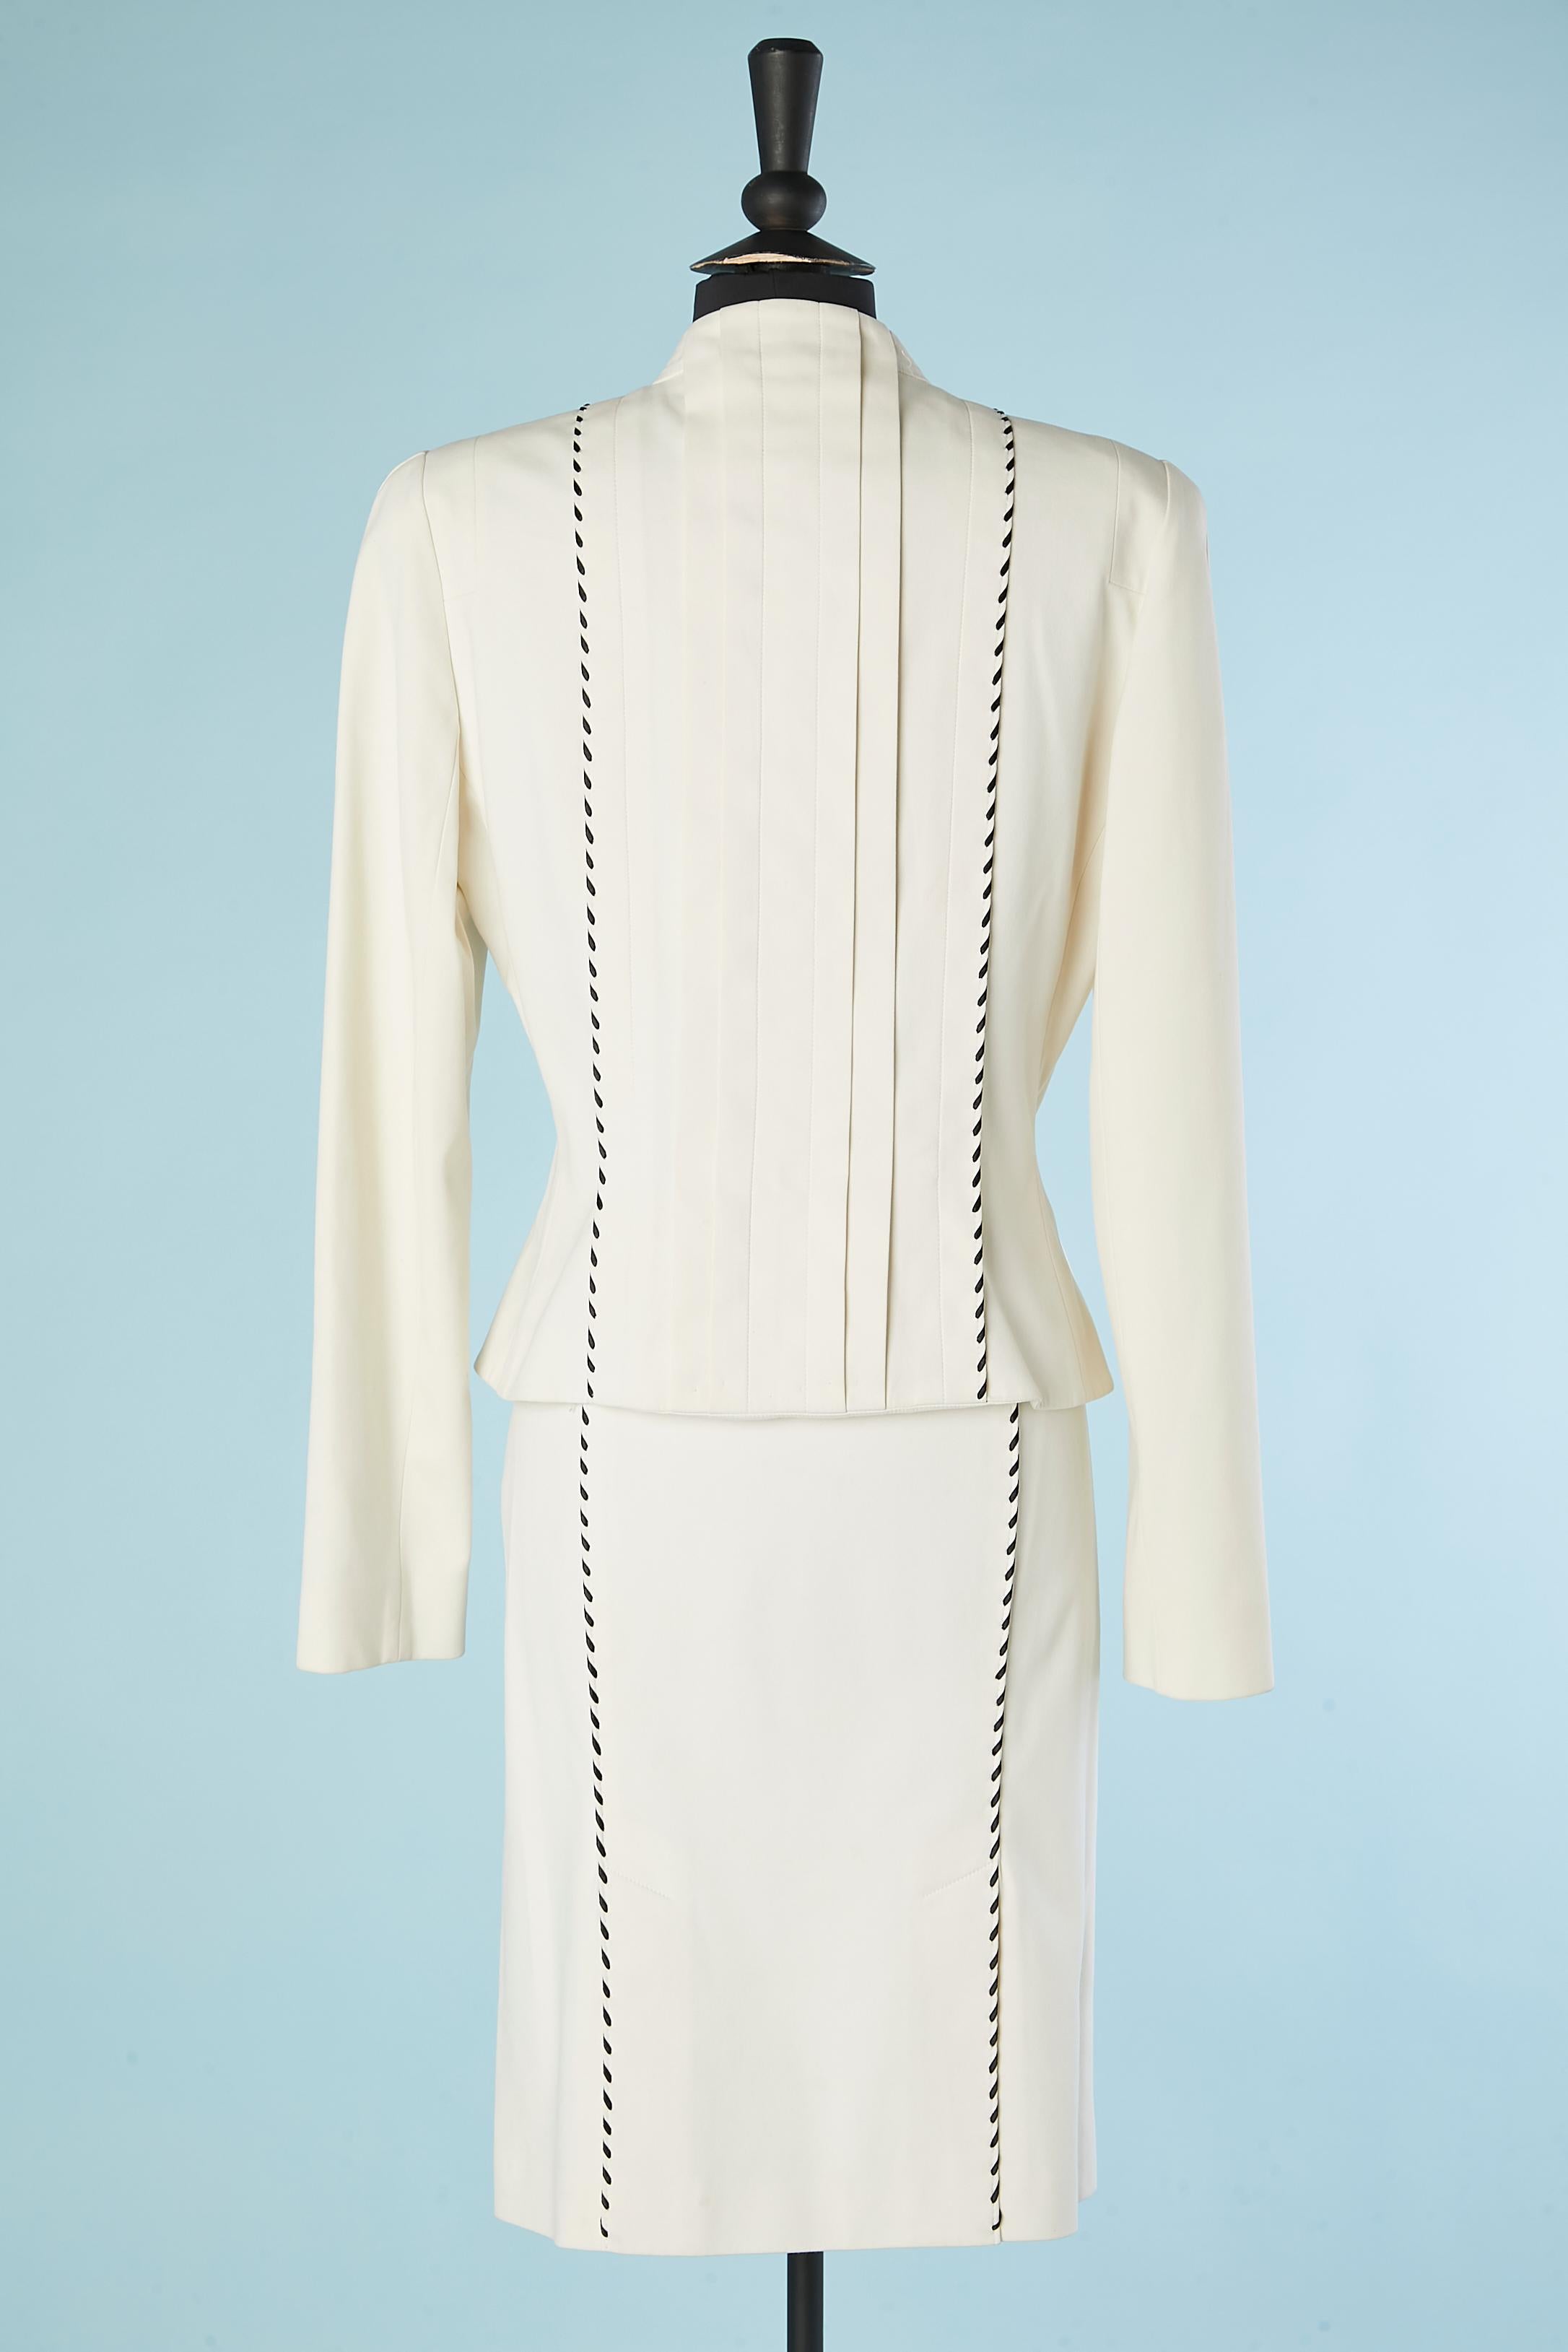 Women's Off-white cotton skirt-suit with black Sellier stiching Thierry Mugler Couture  For Sale